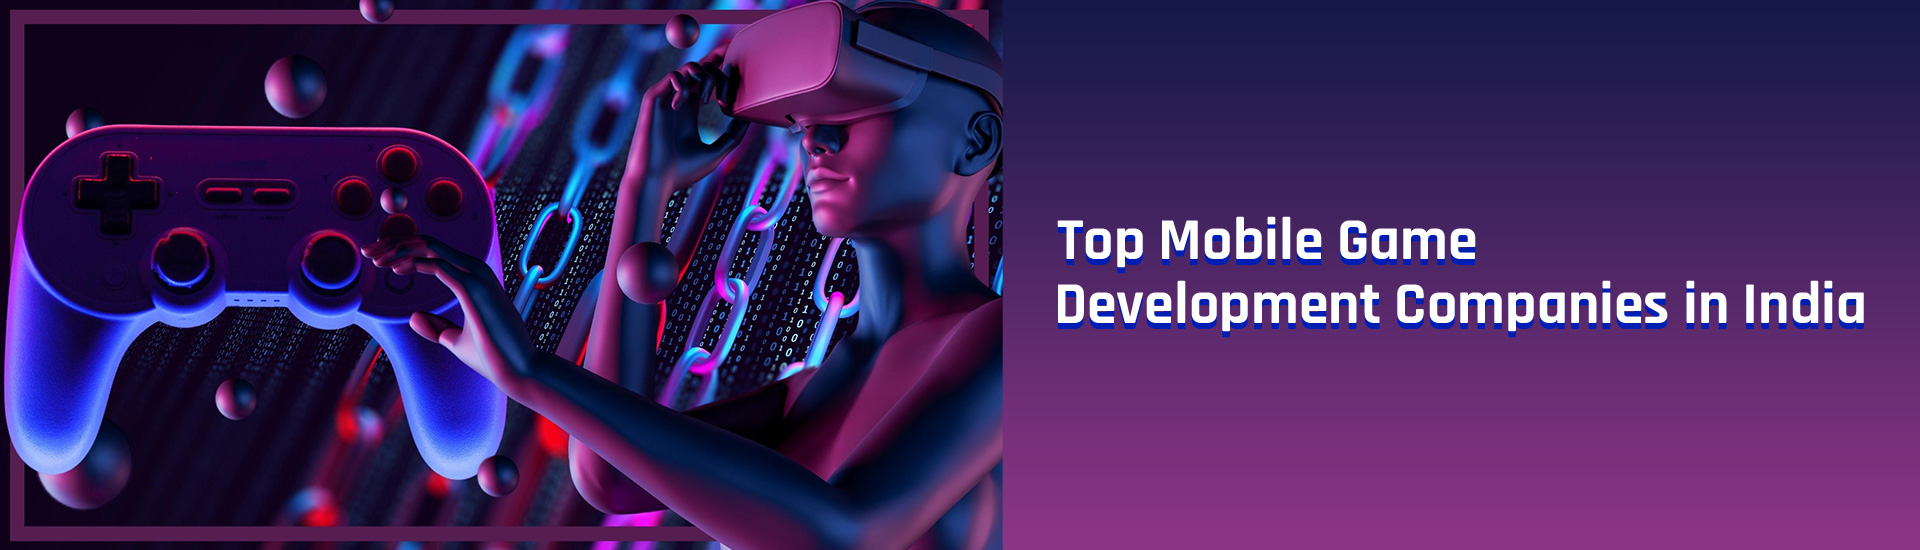 Top Mobile Game Development Companies in India